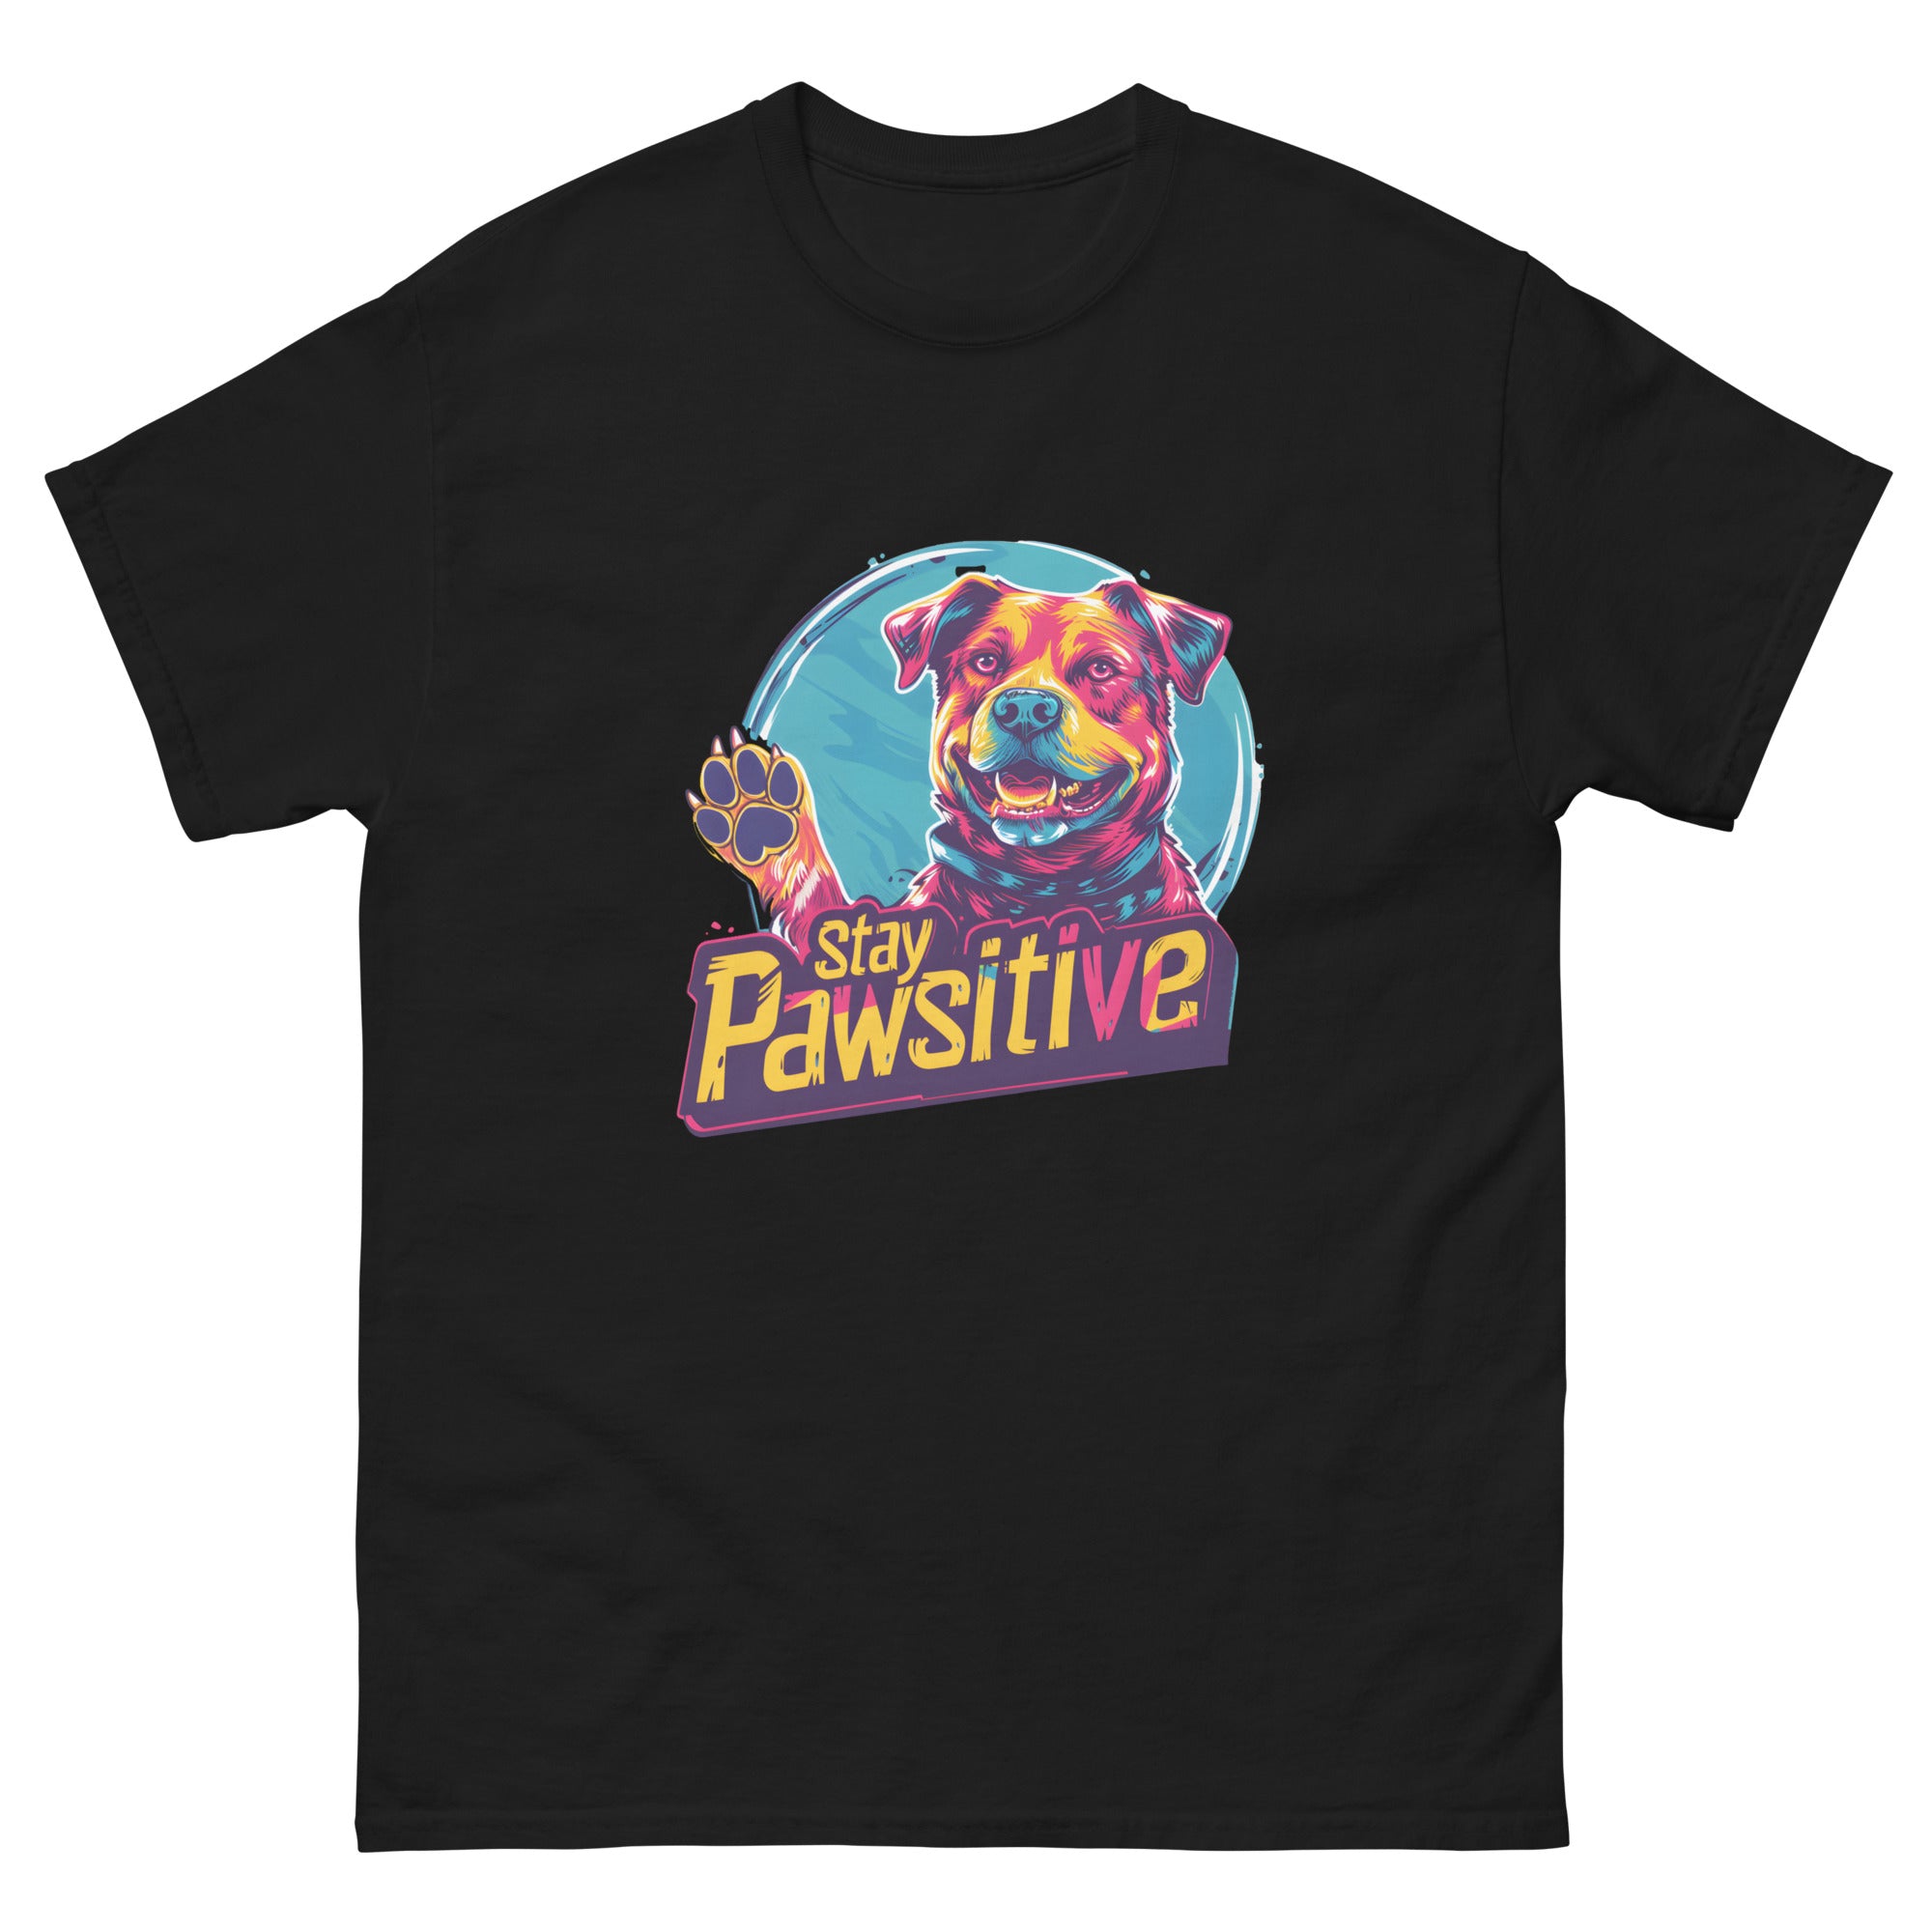 Stay Pawsitive Unisex Funny Dog T-Shirt